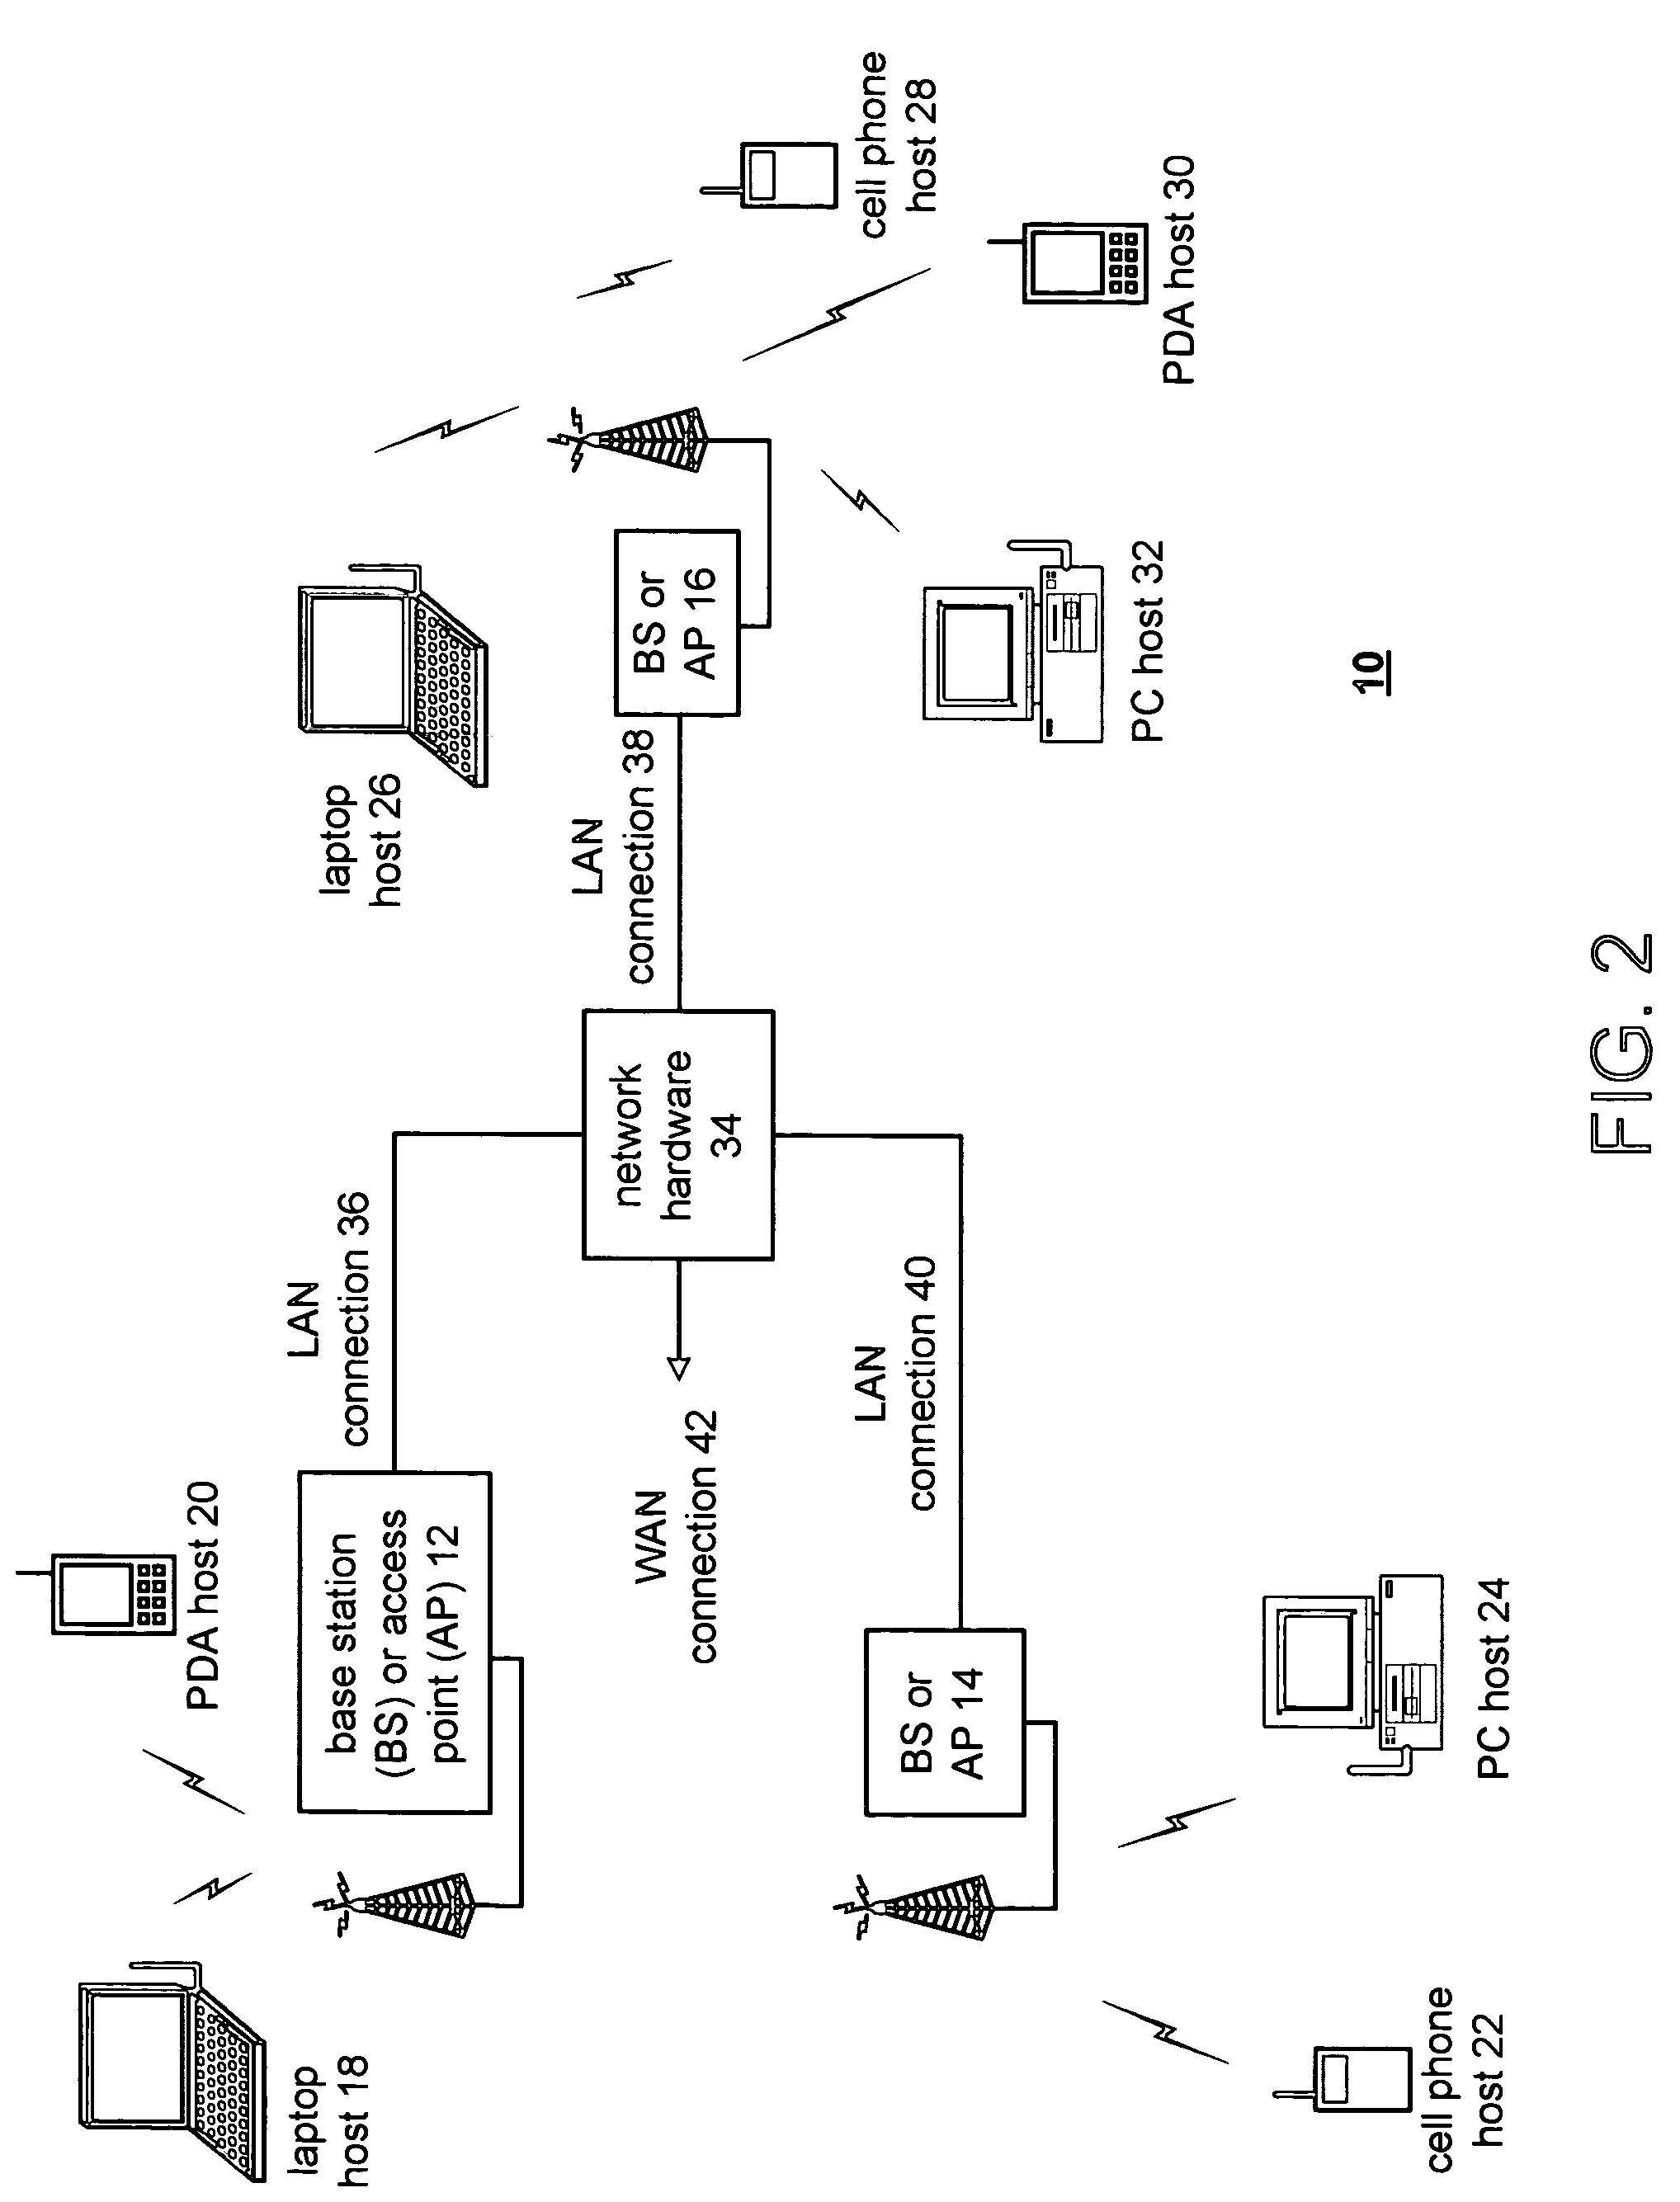 Highly accurate temperature sensor employing mixed-signal components